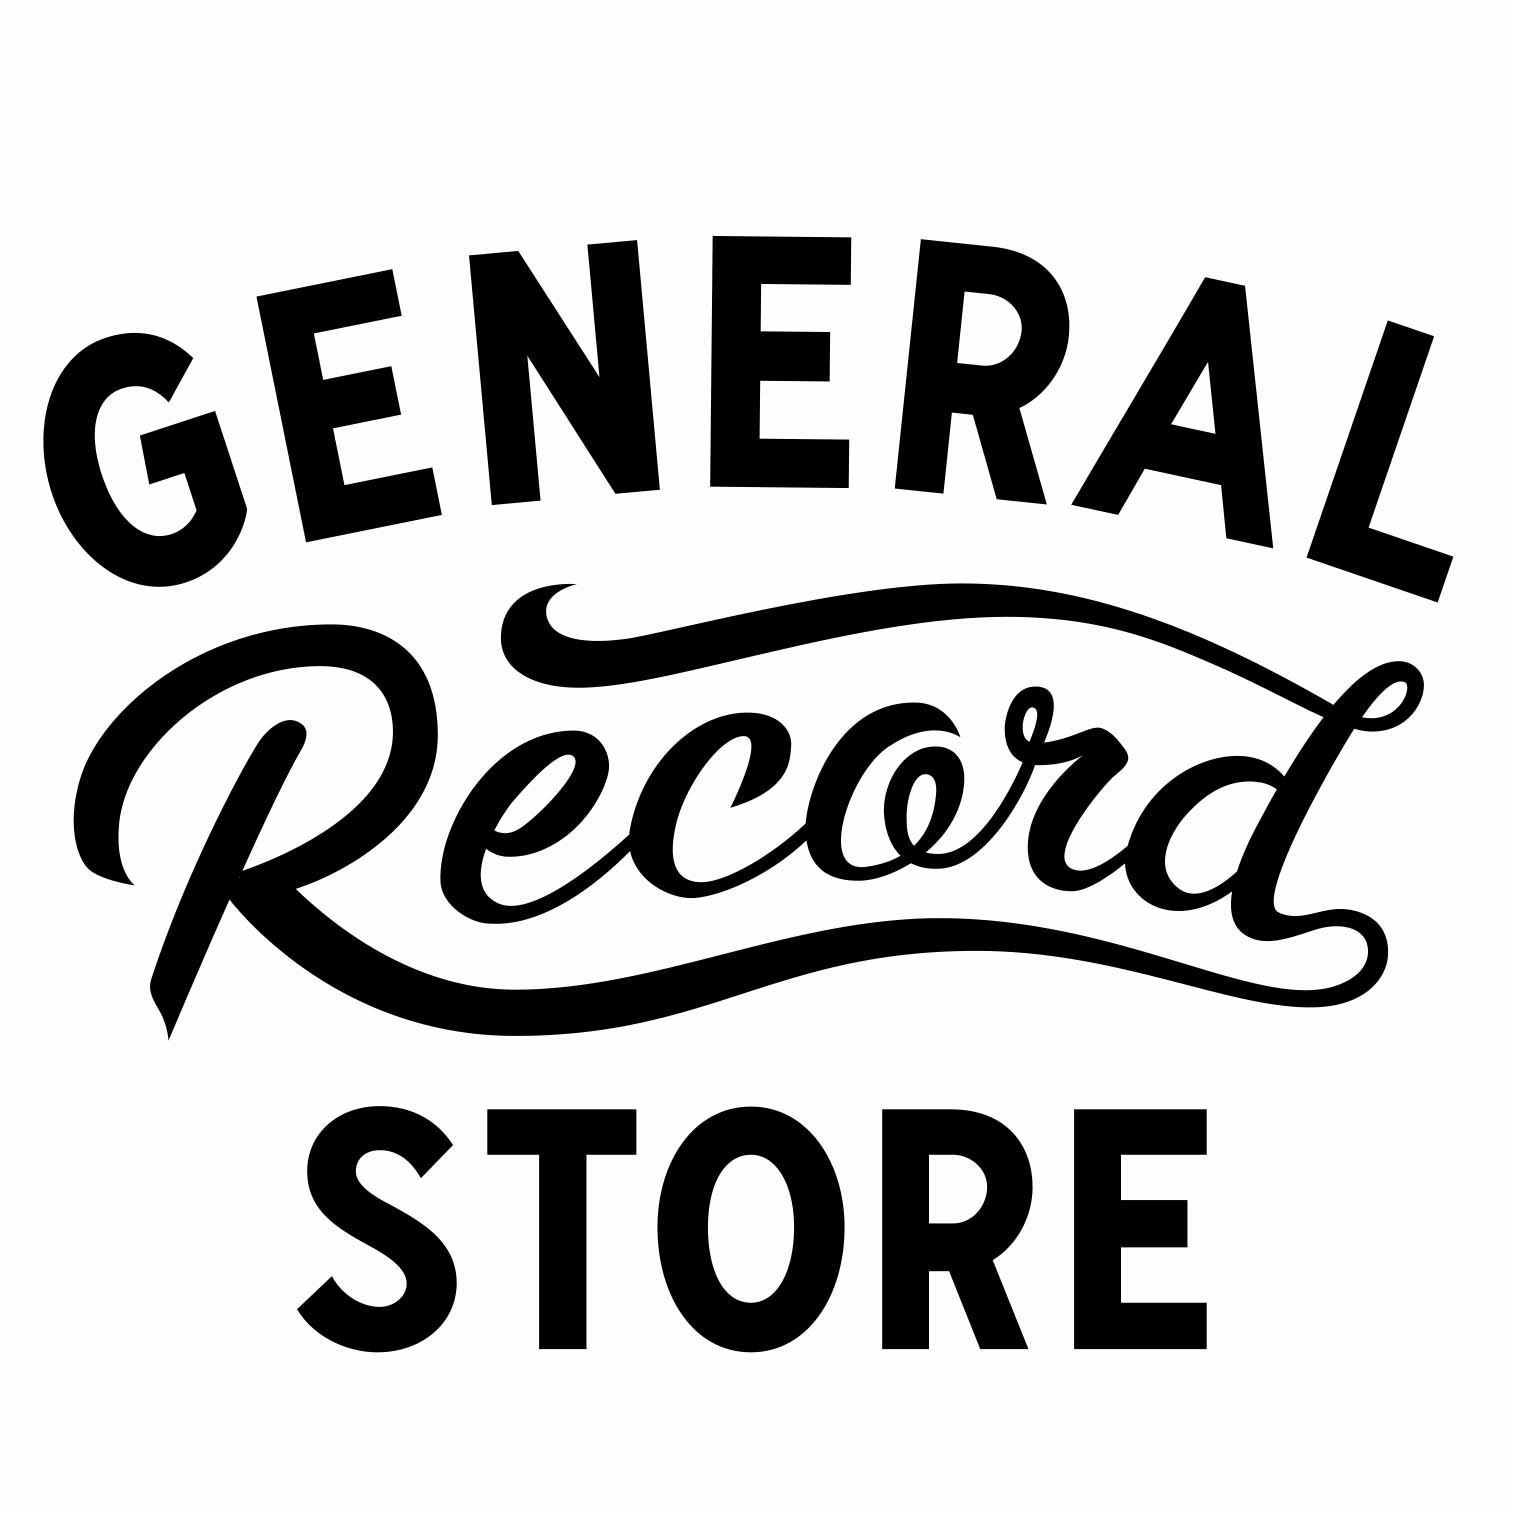 GENERAL RECORD STORE 79